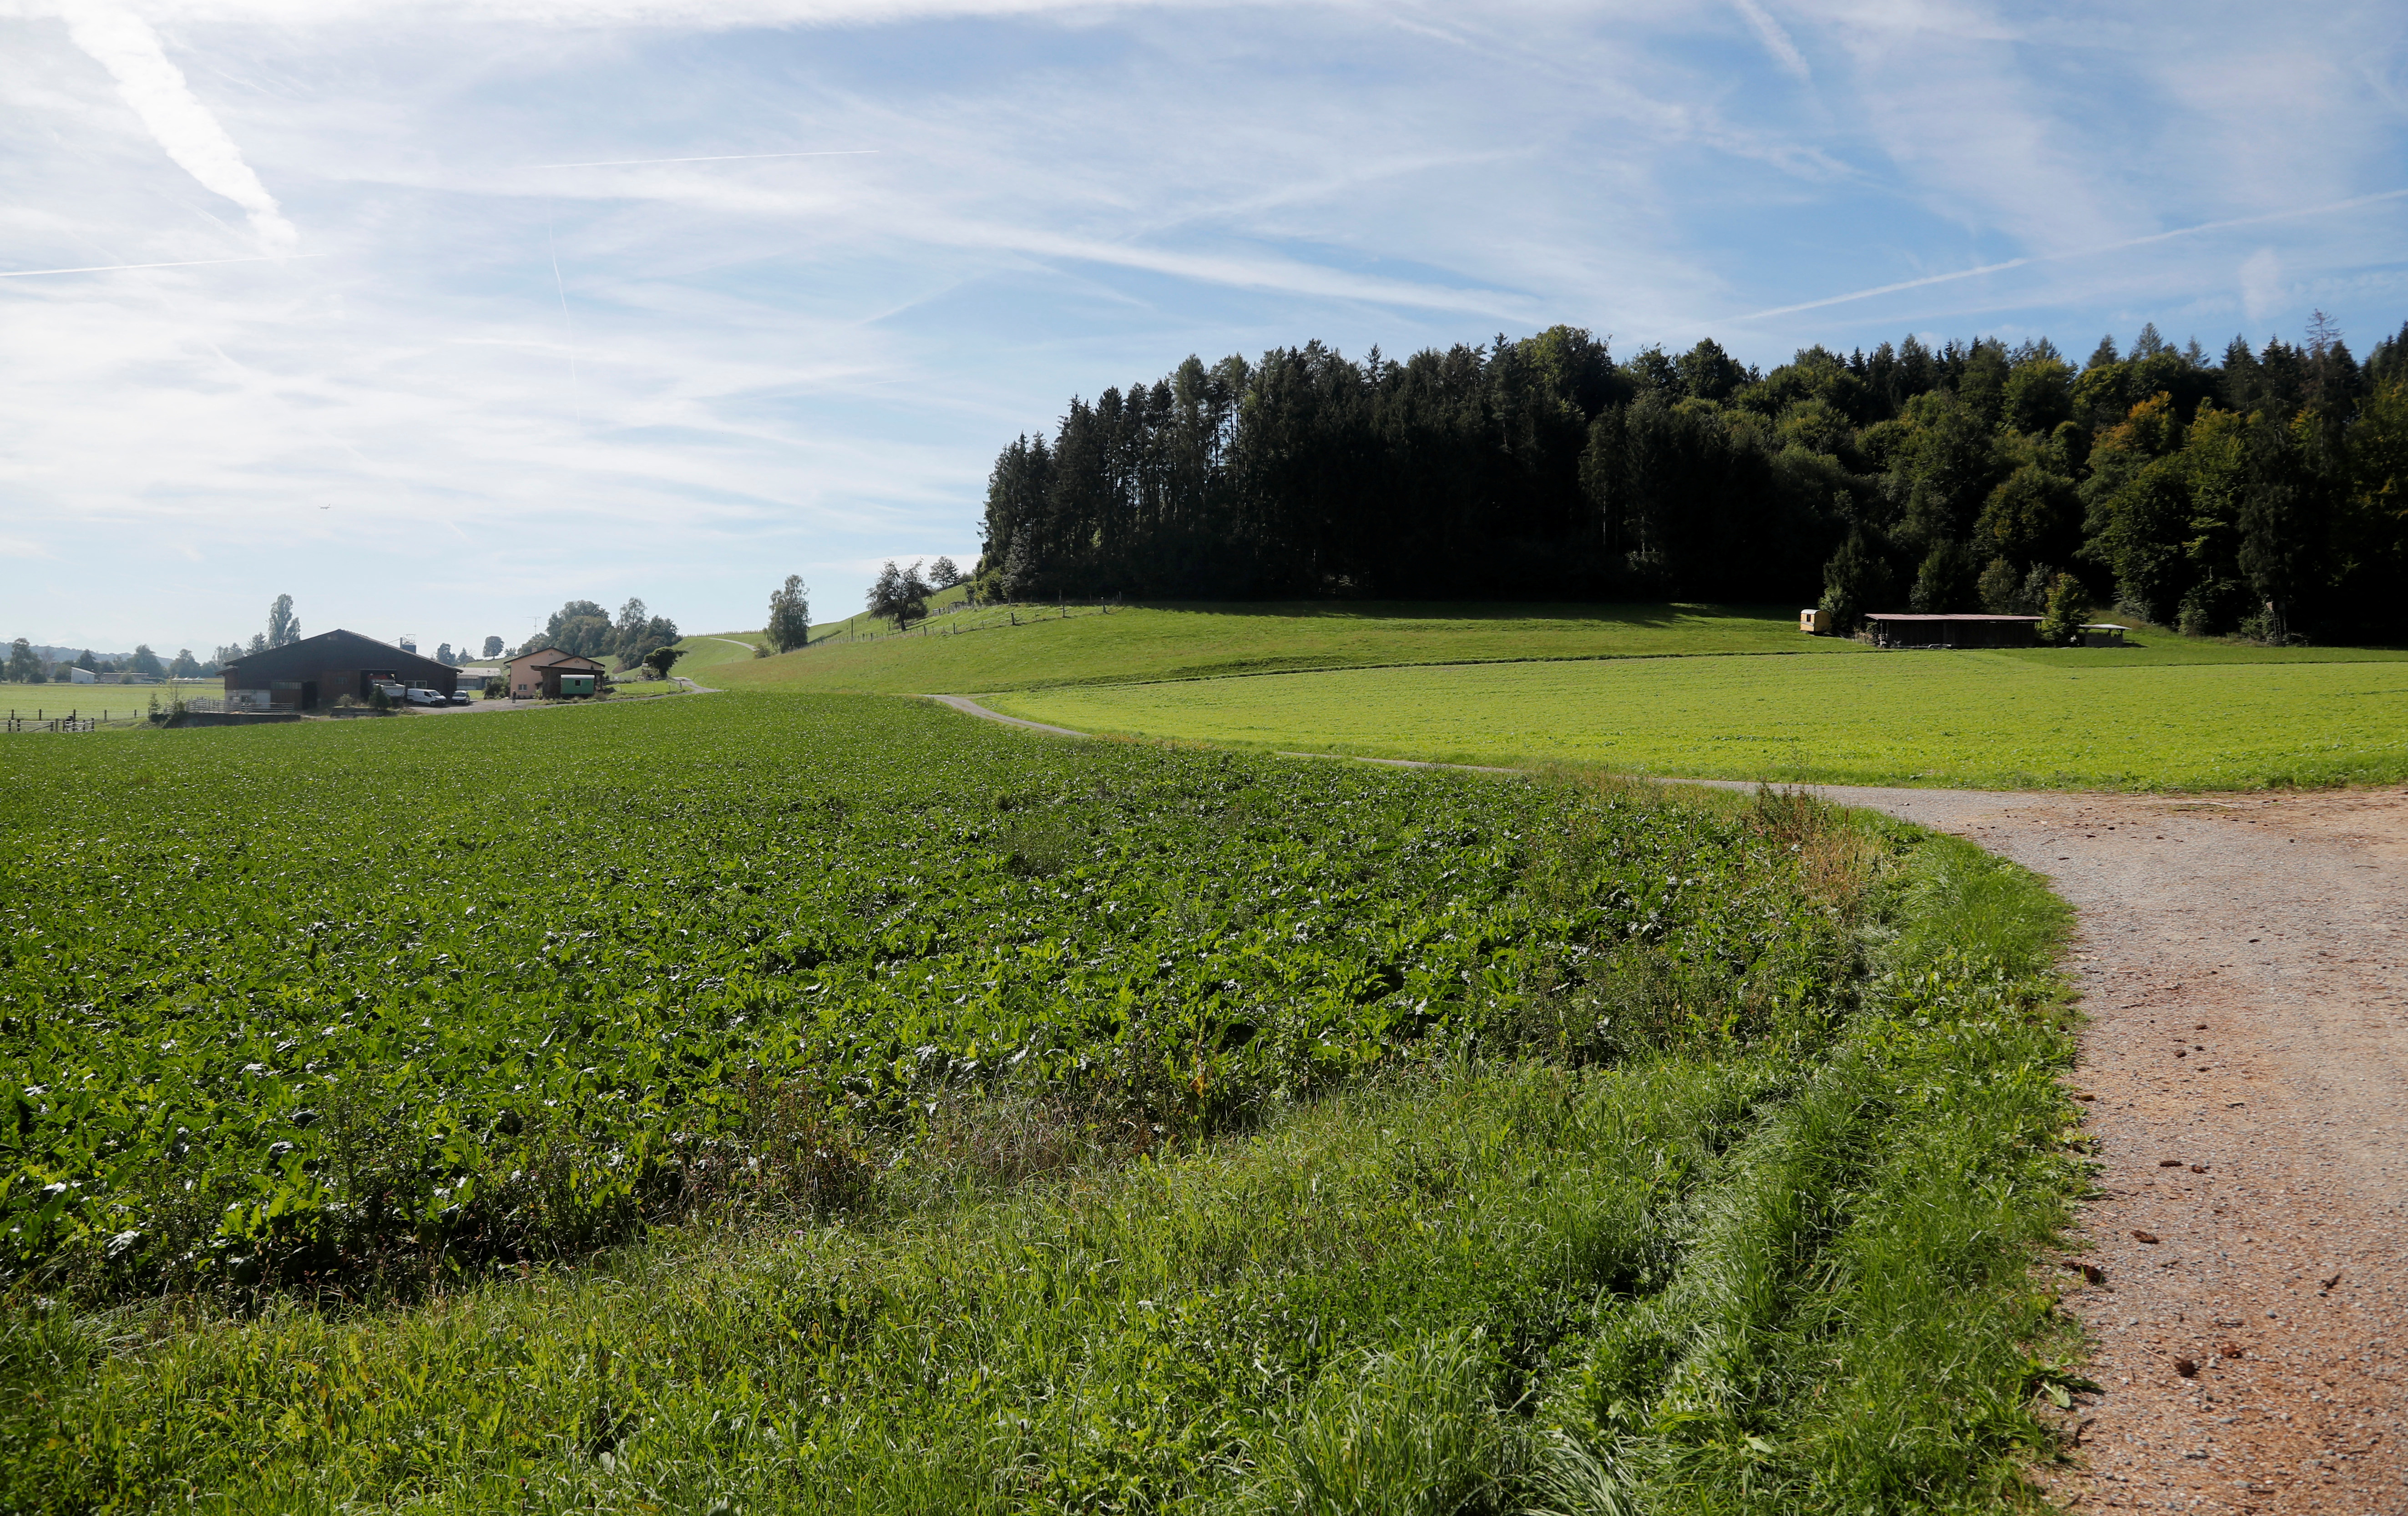 Haberstal area, favoured location for a underground nuclear waste storage site near Stadel